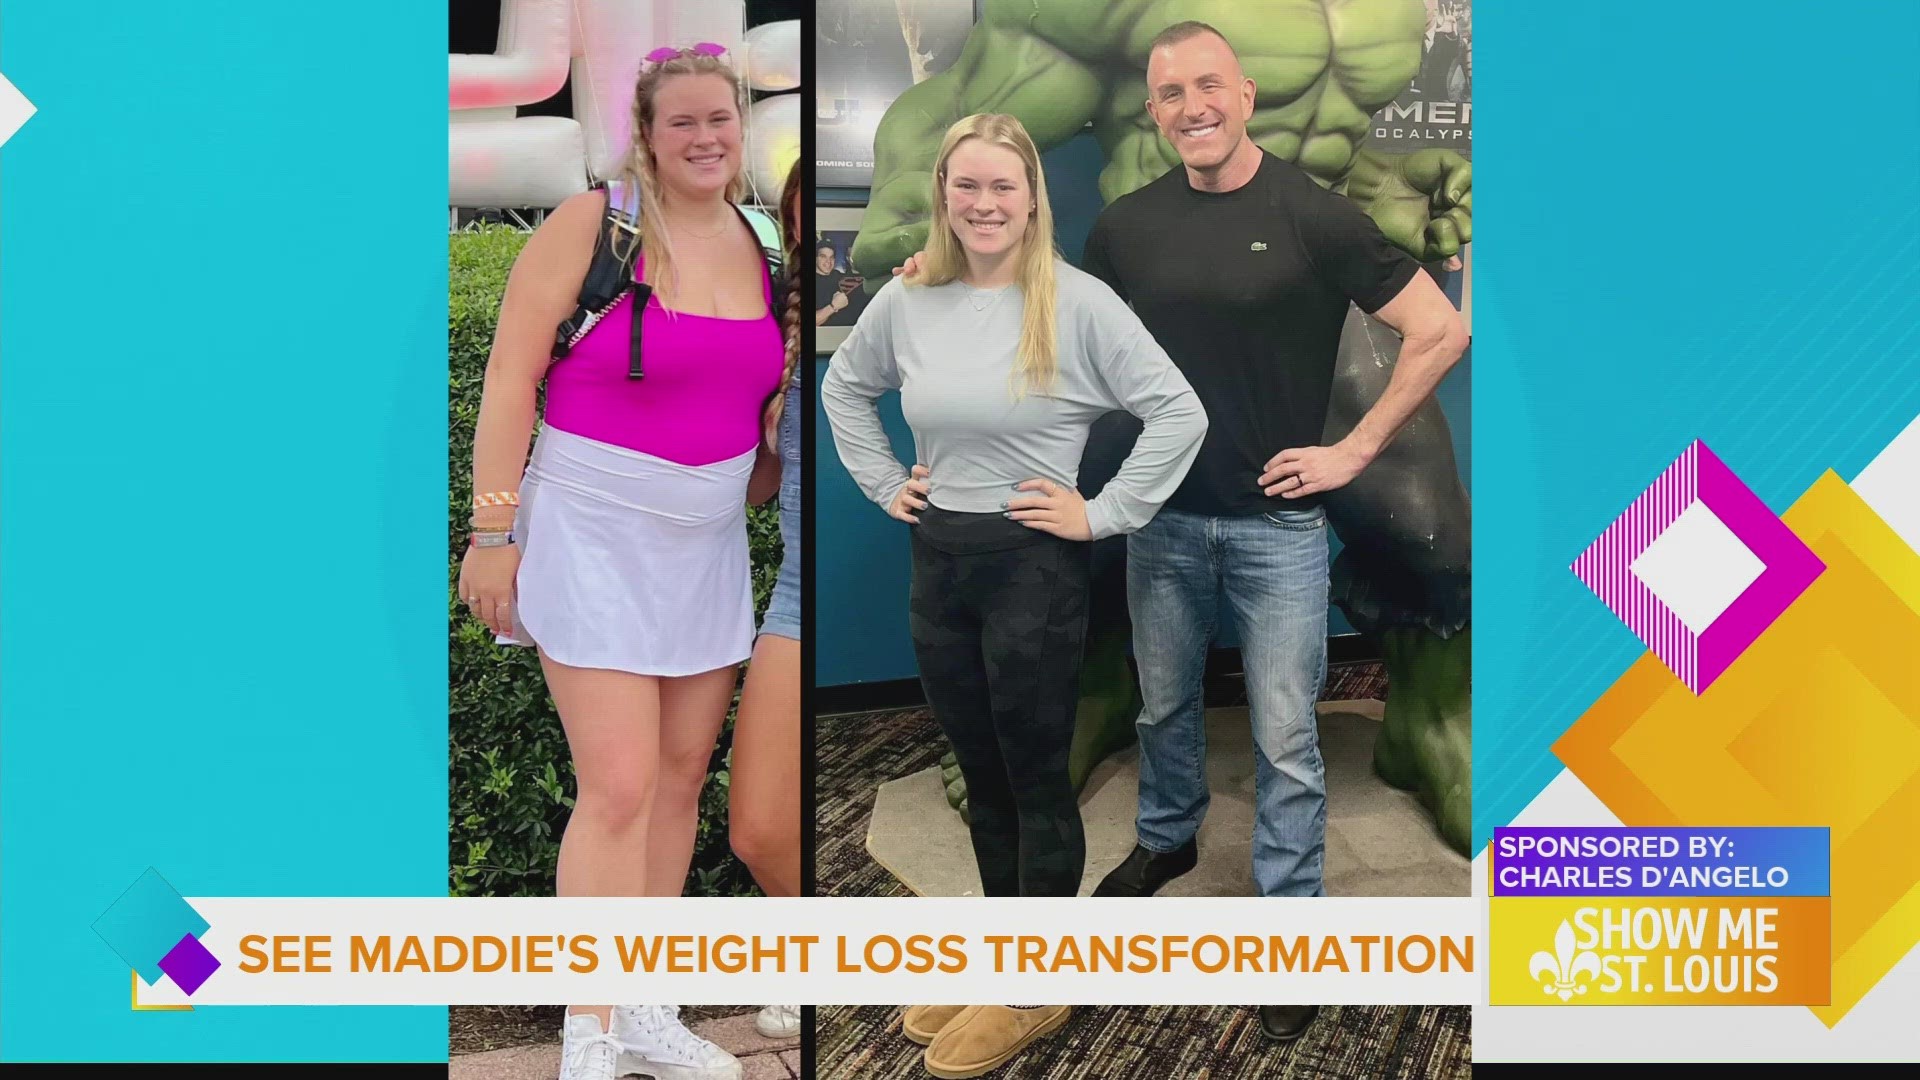 It's transformation Tuesday! Meet Maddie and hear her story after working with Charles D'Angelo.